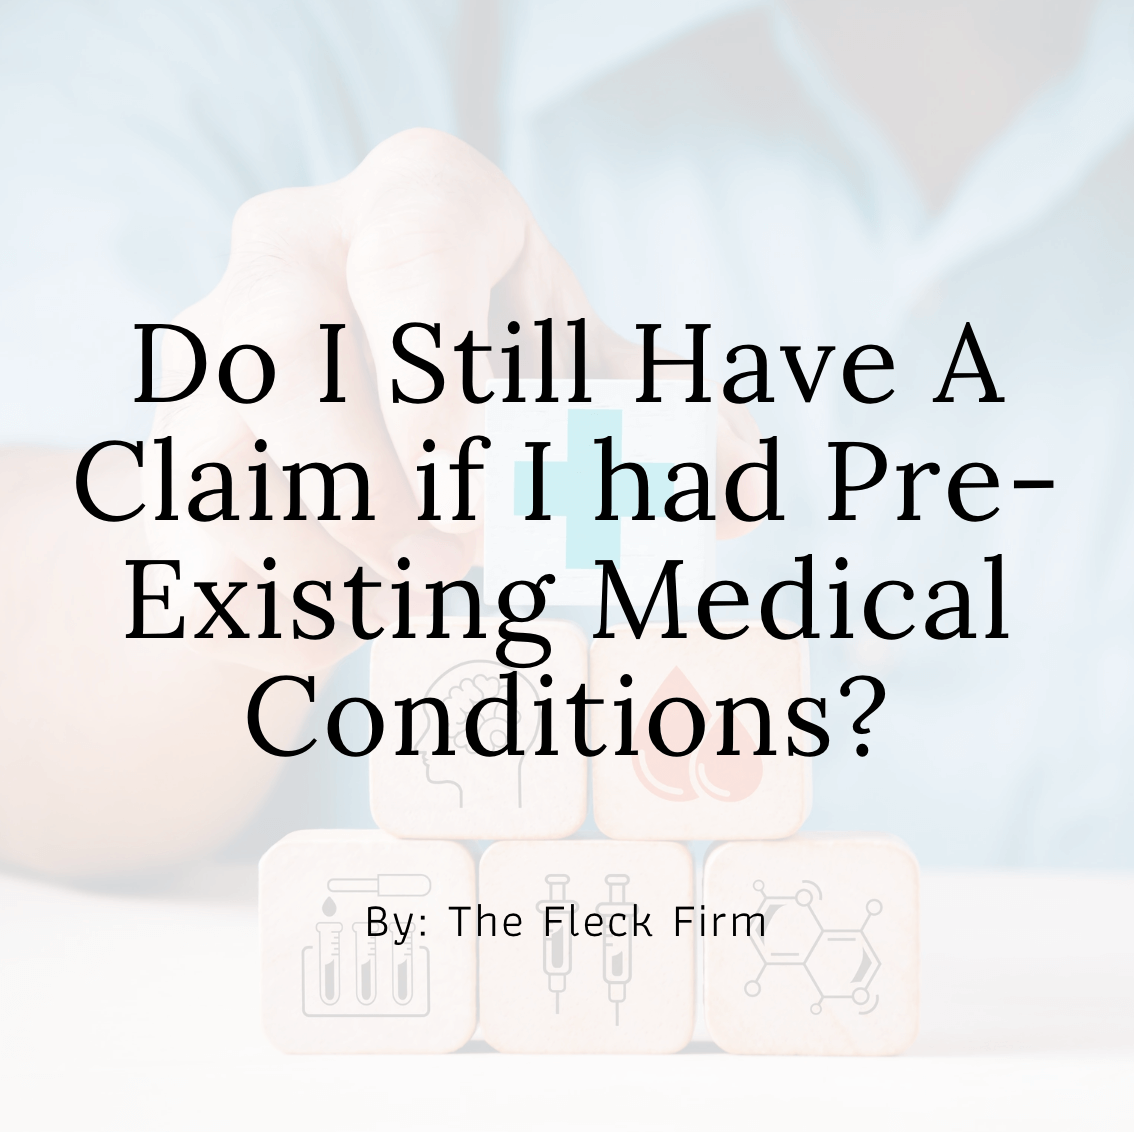 Do I still have a car accident claim if I had pre-existig medical conditions